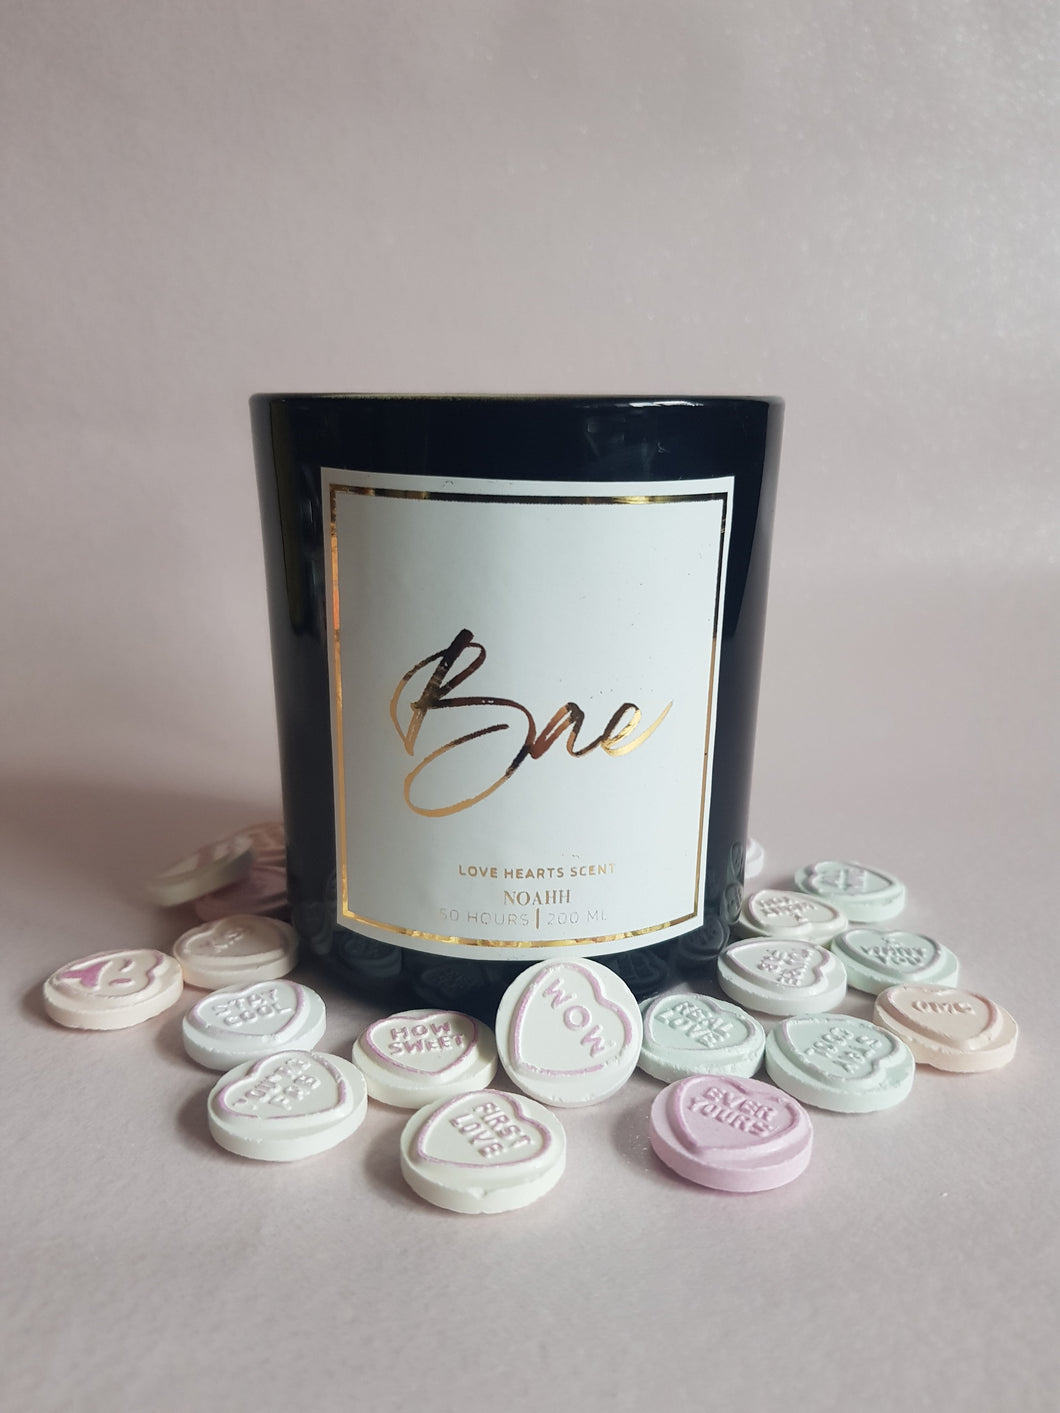 Love hearts scented candle